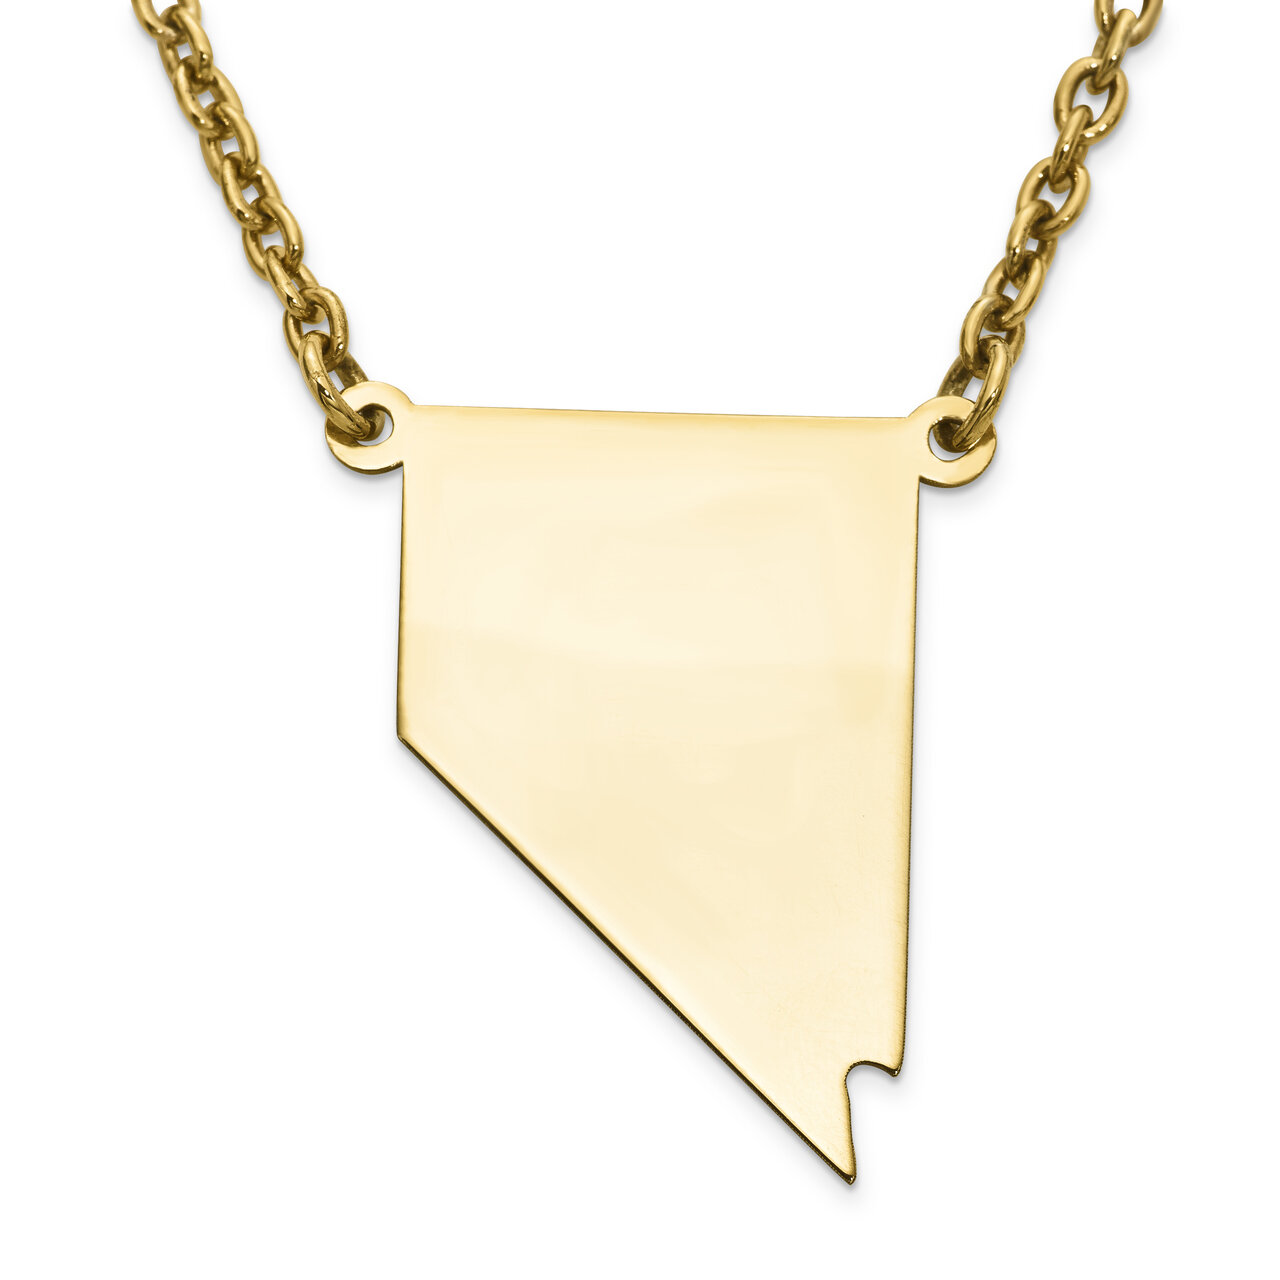 Nevada State Pendant Necklace with Chain 14k Yellow Gold Engravable XNA706Y-NV